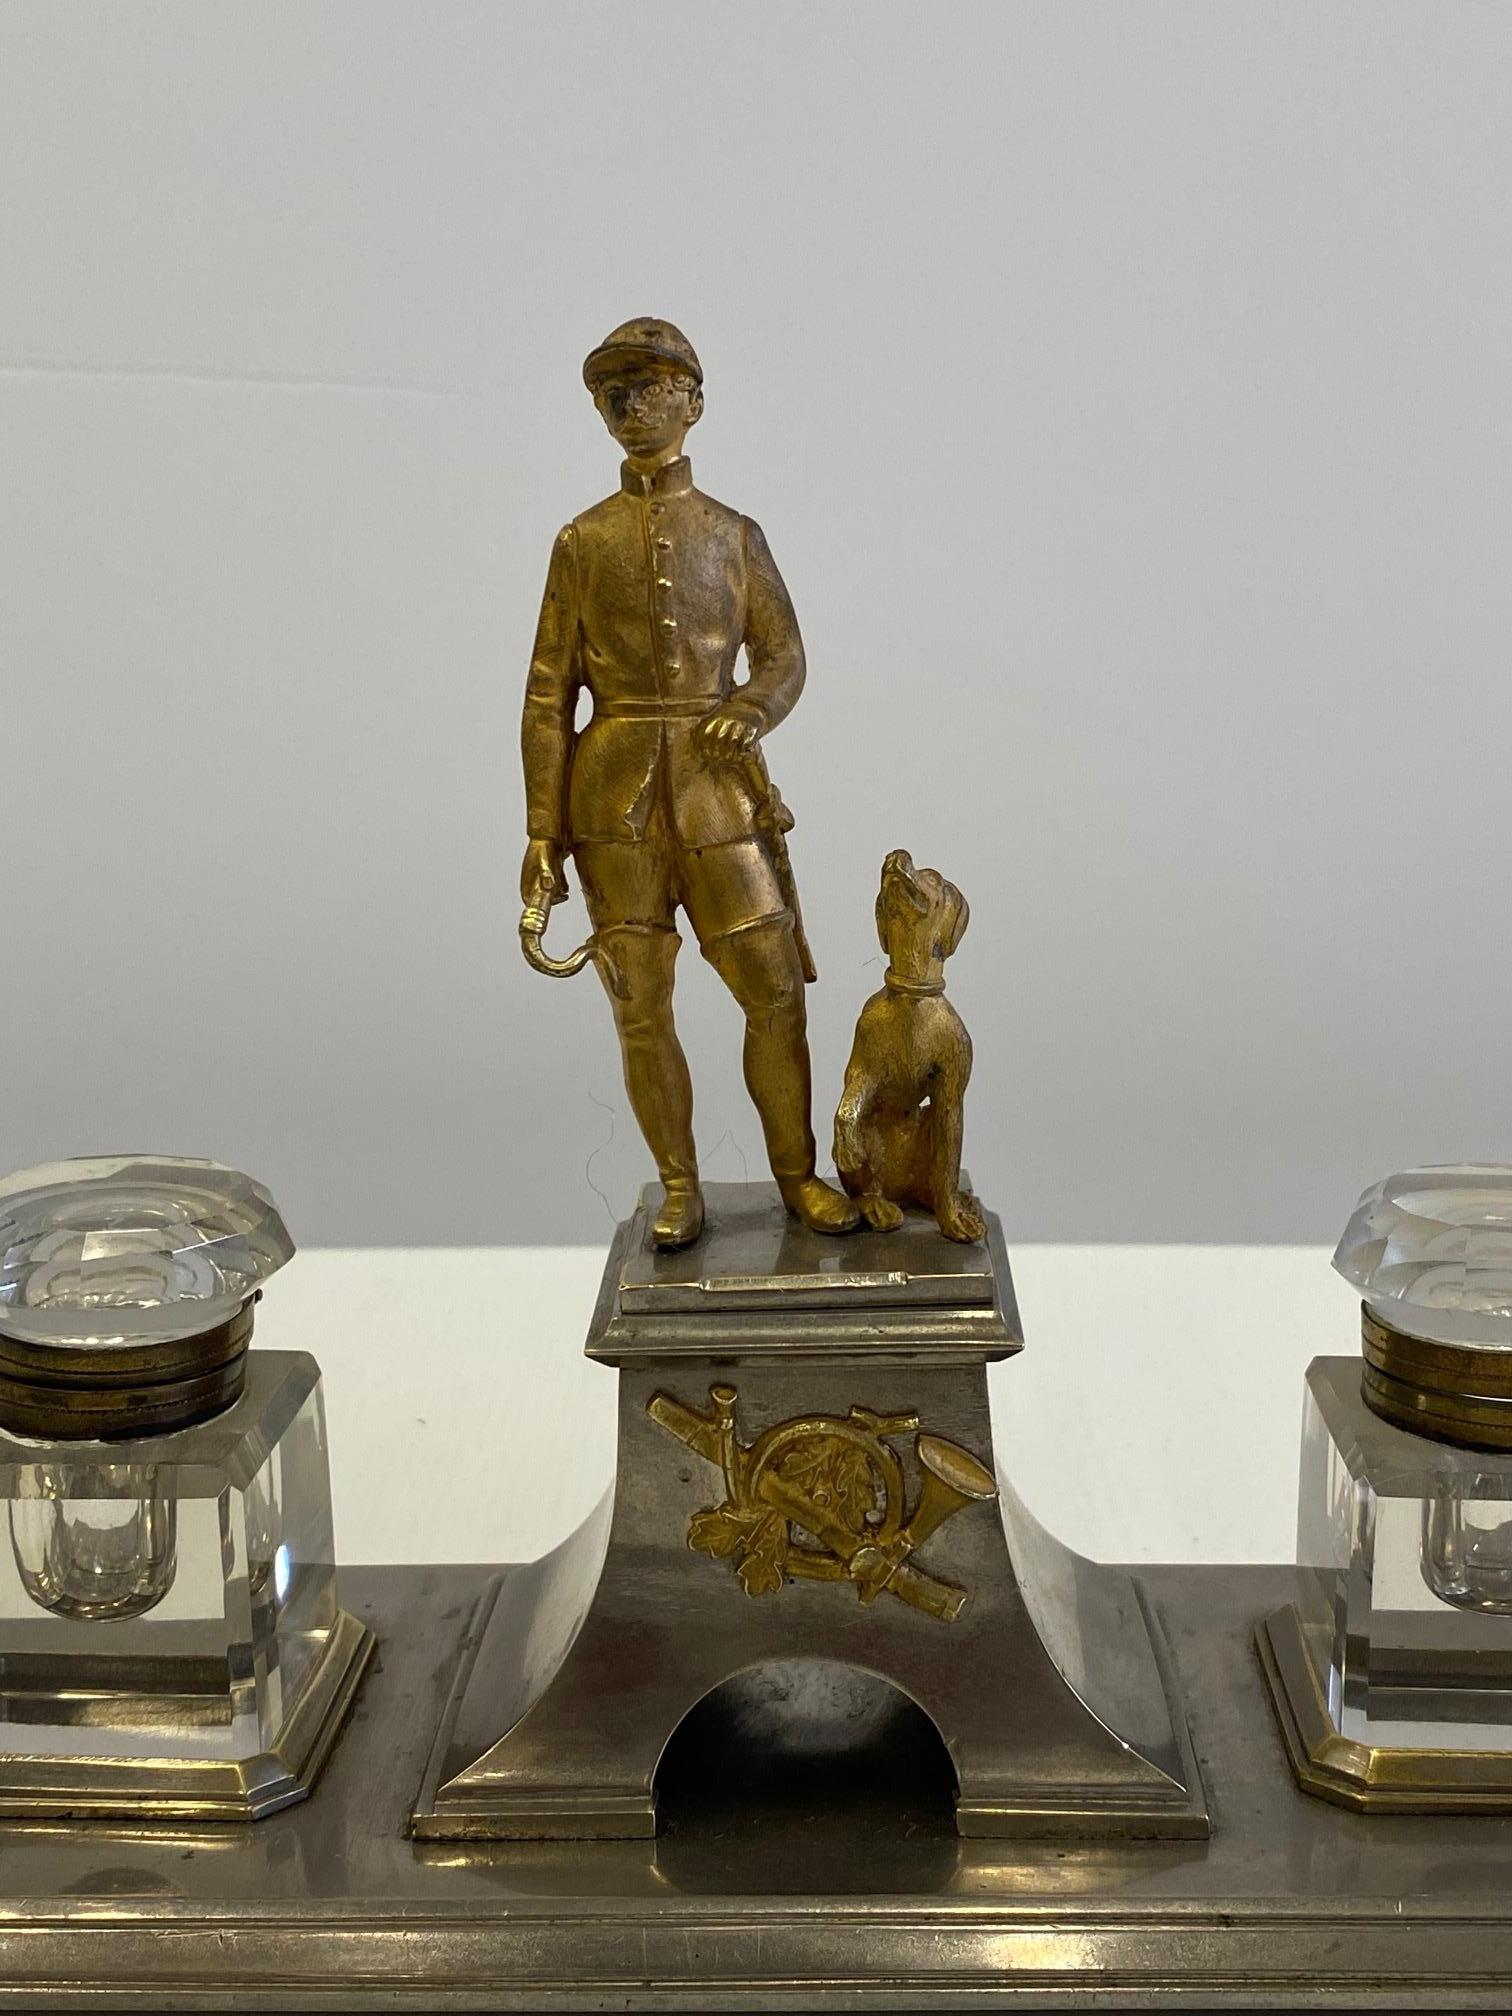 Marvelously detailed French antique desk accessory inkwell made of gilt bronze and nickel plate having sculptural horseman in period outfit accompanied by loyal hound dog at his side. There are two beautiful cut glass inkwells.
  